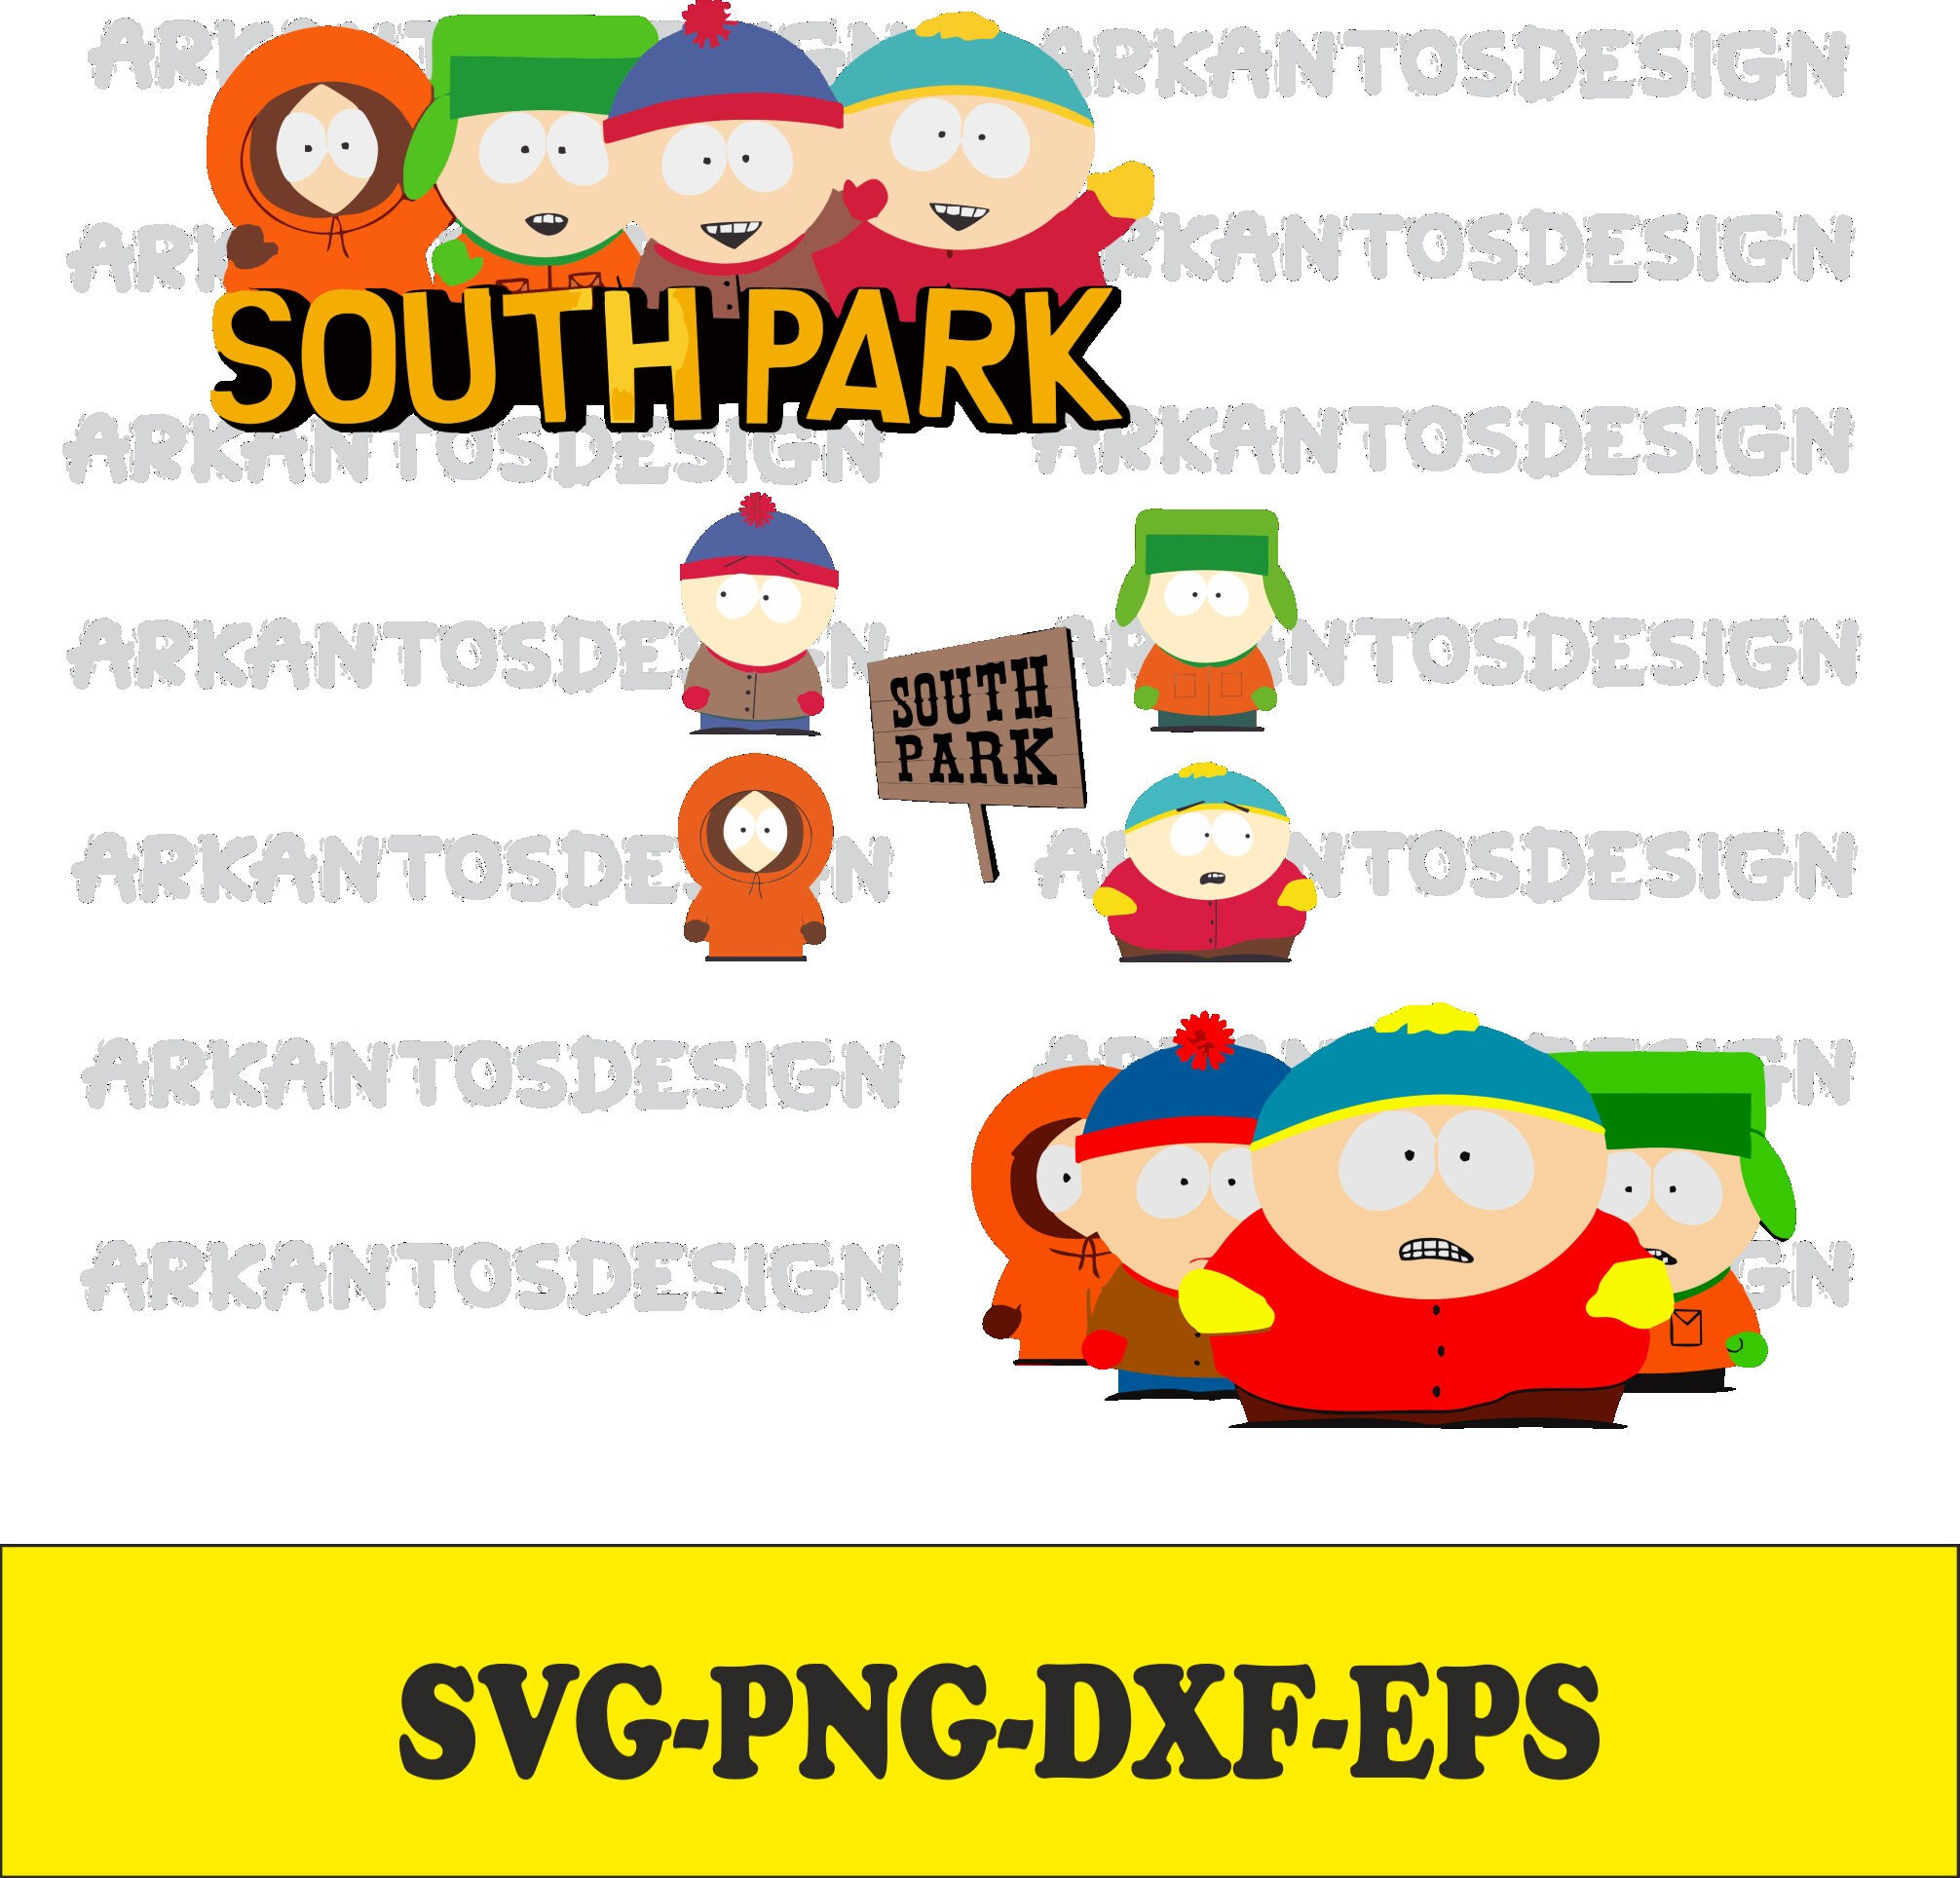 South Park South Park Vinyl Large Deluxe Stickers Variety Pack - Laptop,  Water Bottle, Scrapbooking, Tablet, Skateboard, Indoor/Outdoor - Set of 100